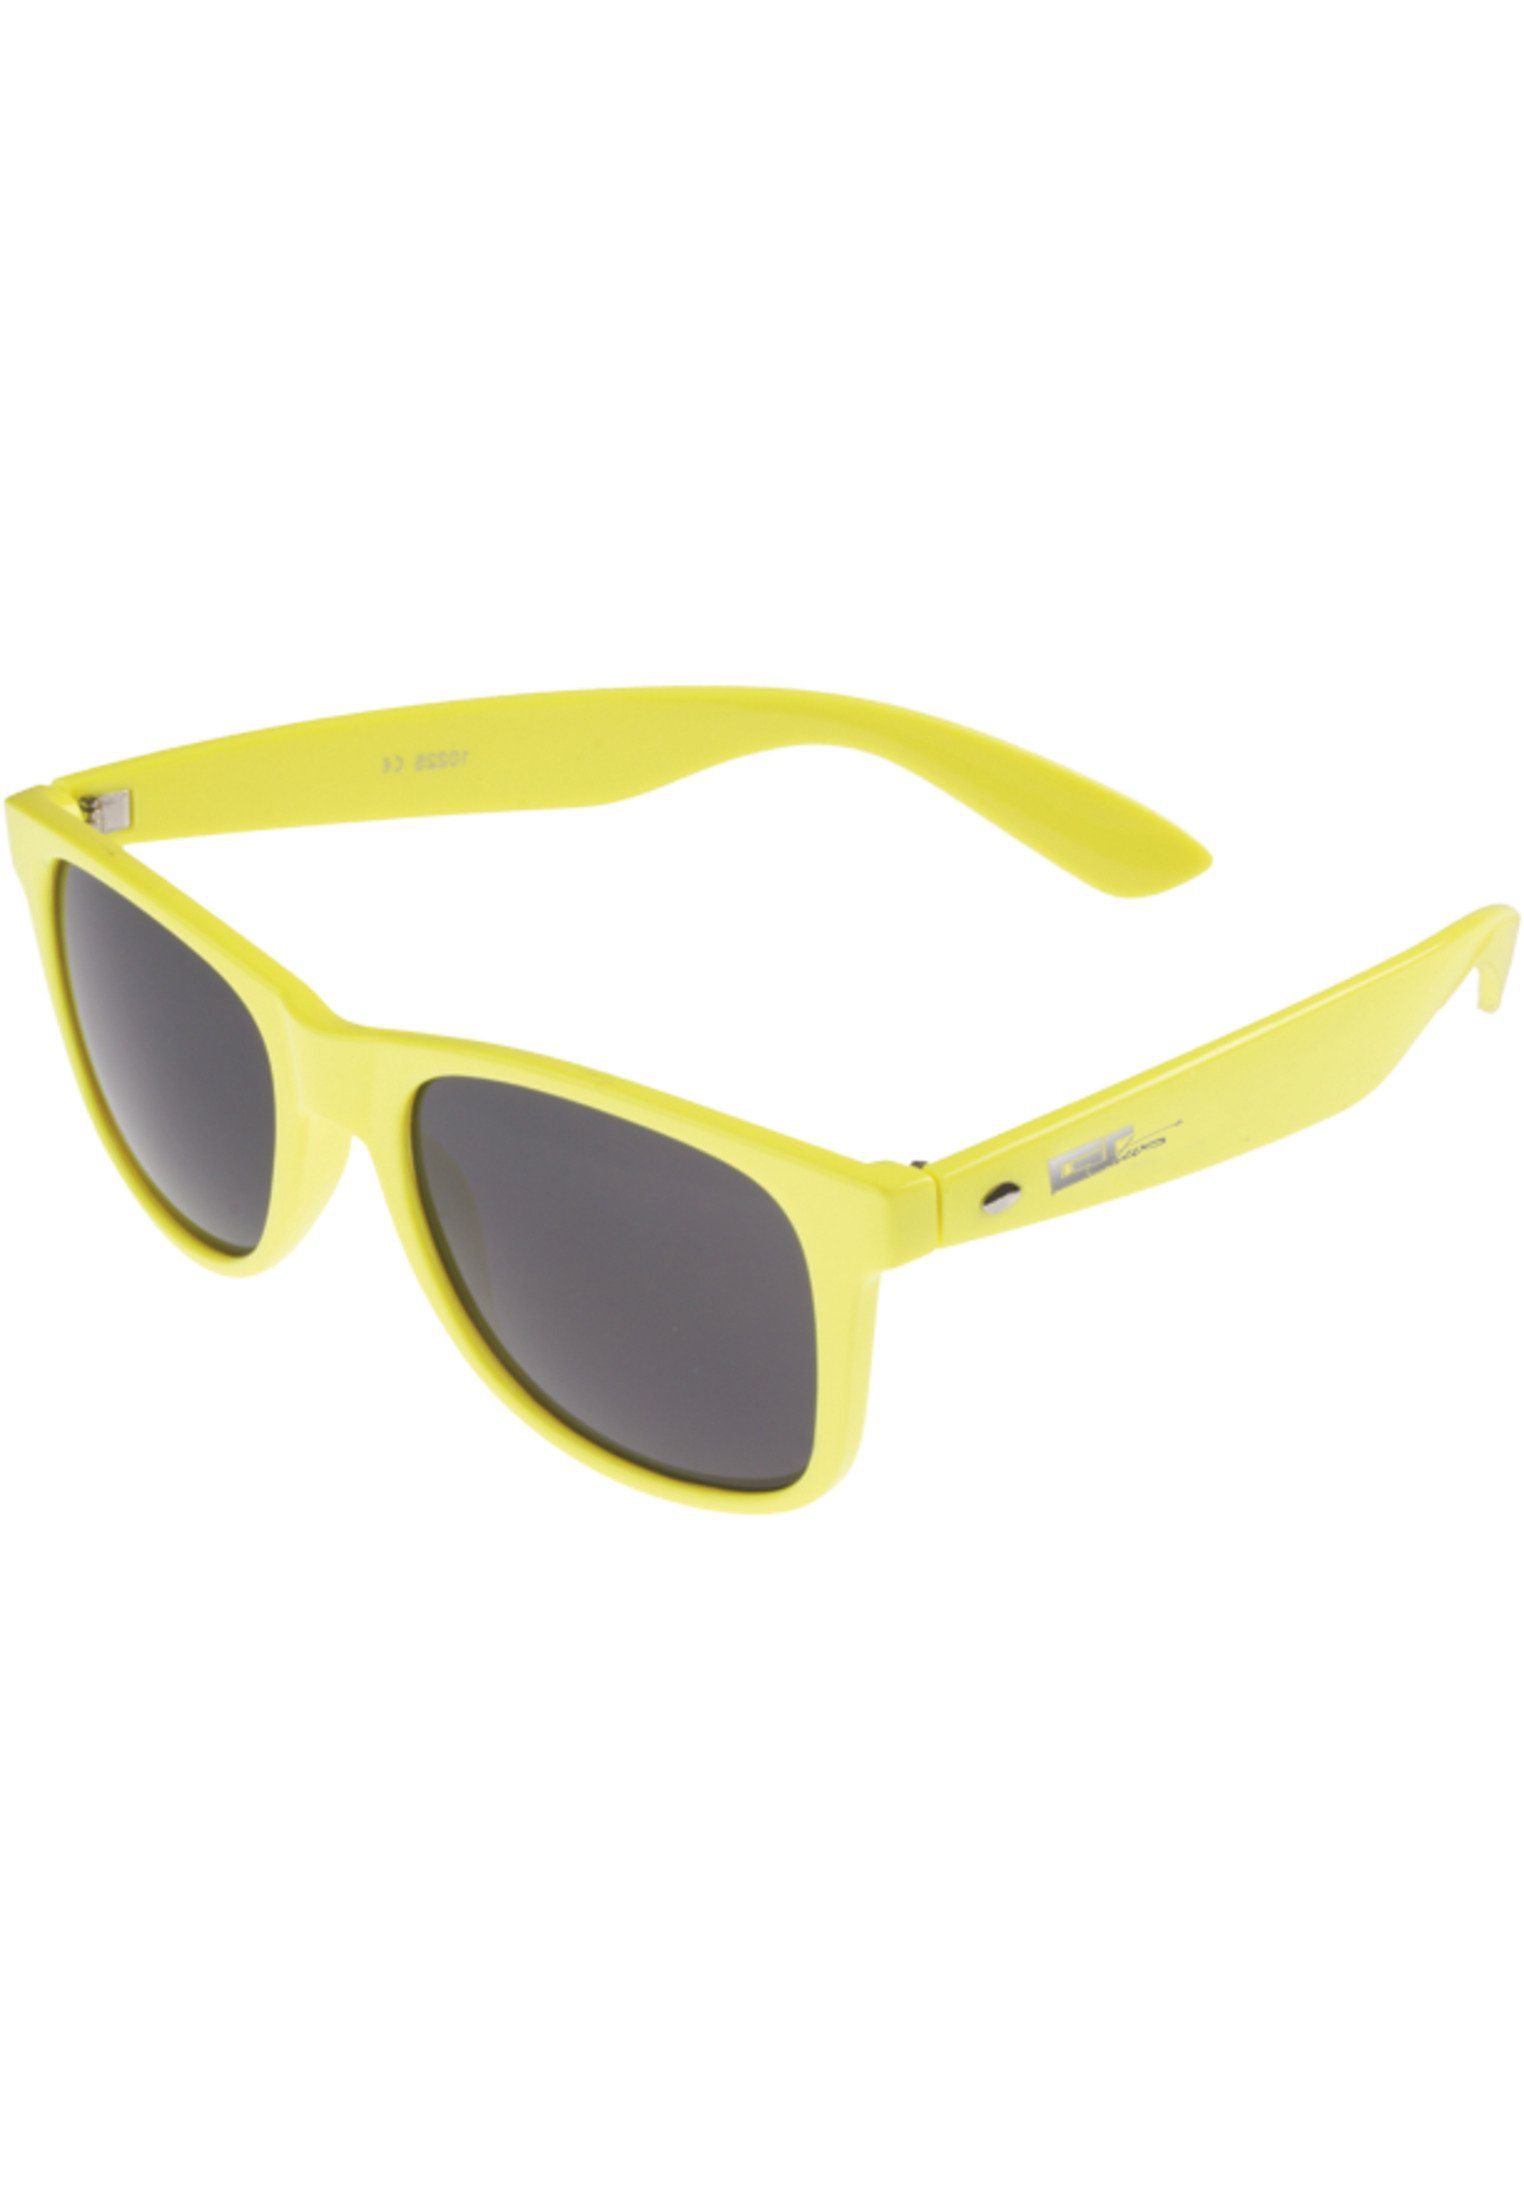 Groove MSTRDS Shades GStwo Sonnenbrille neonyellow Accessoires